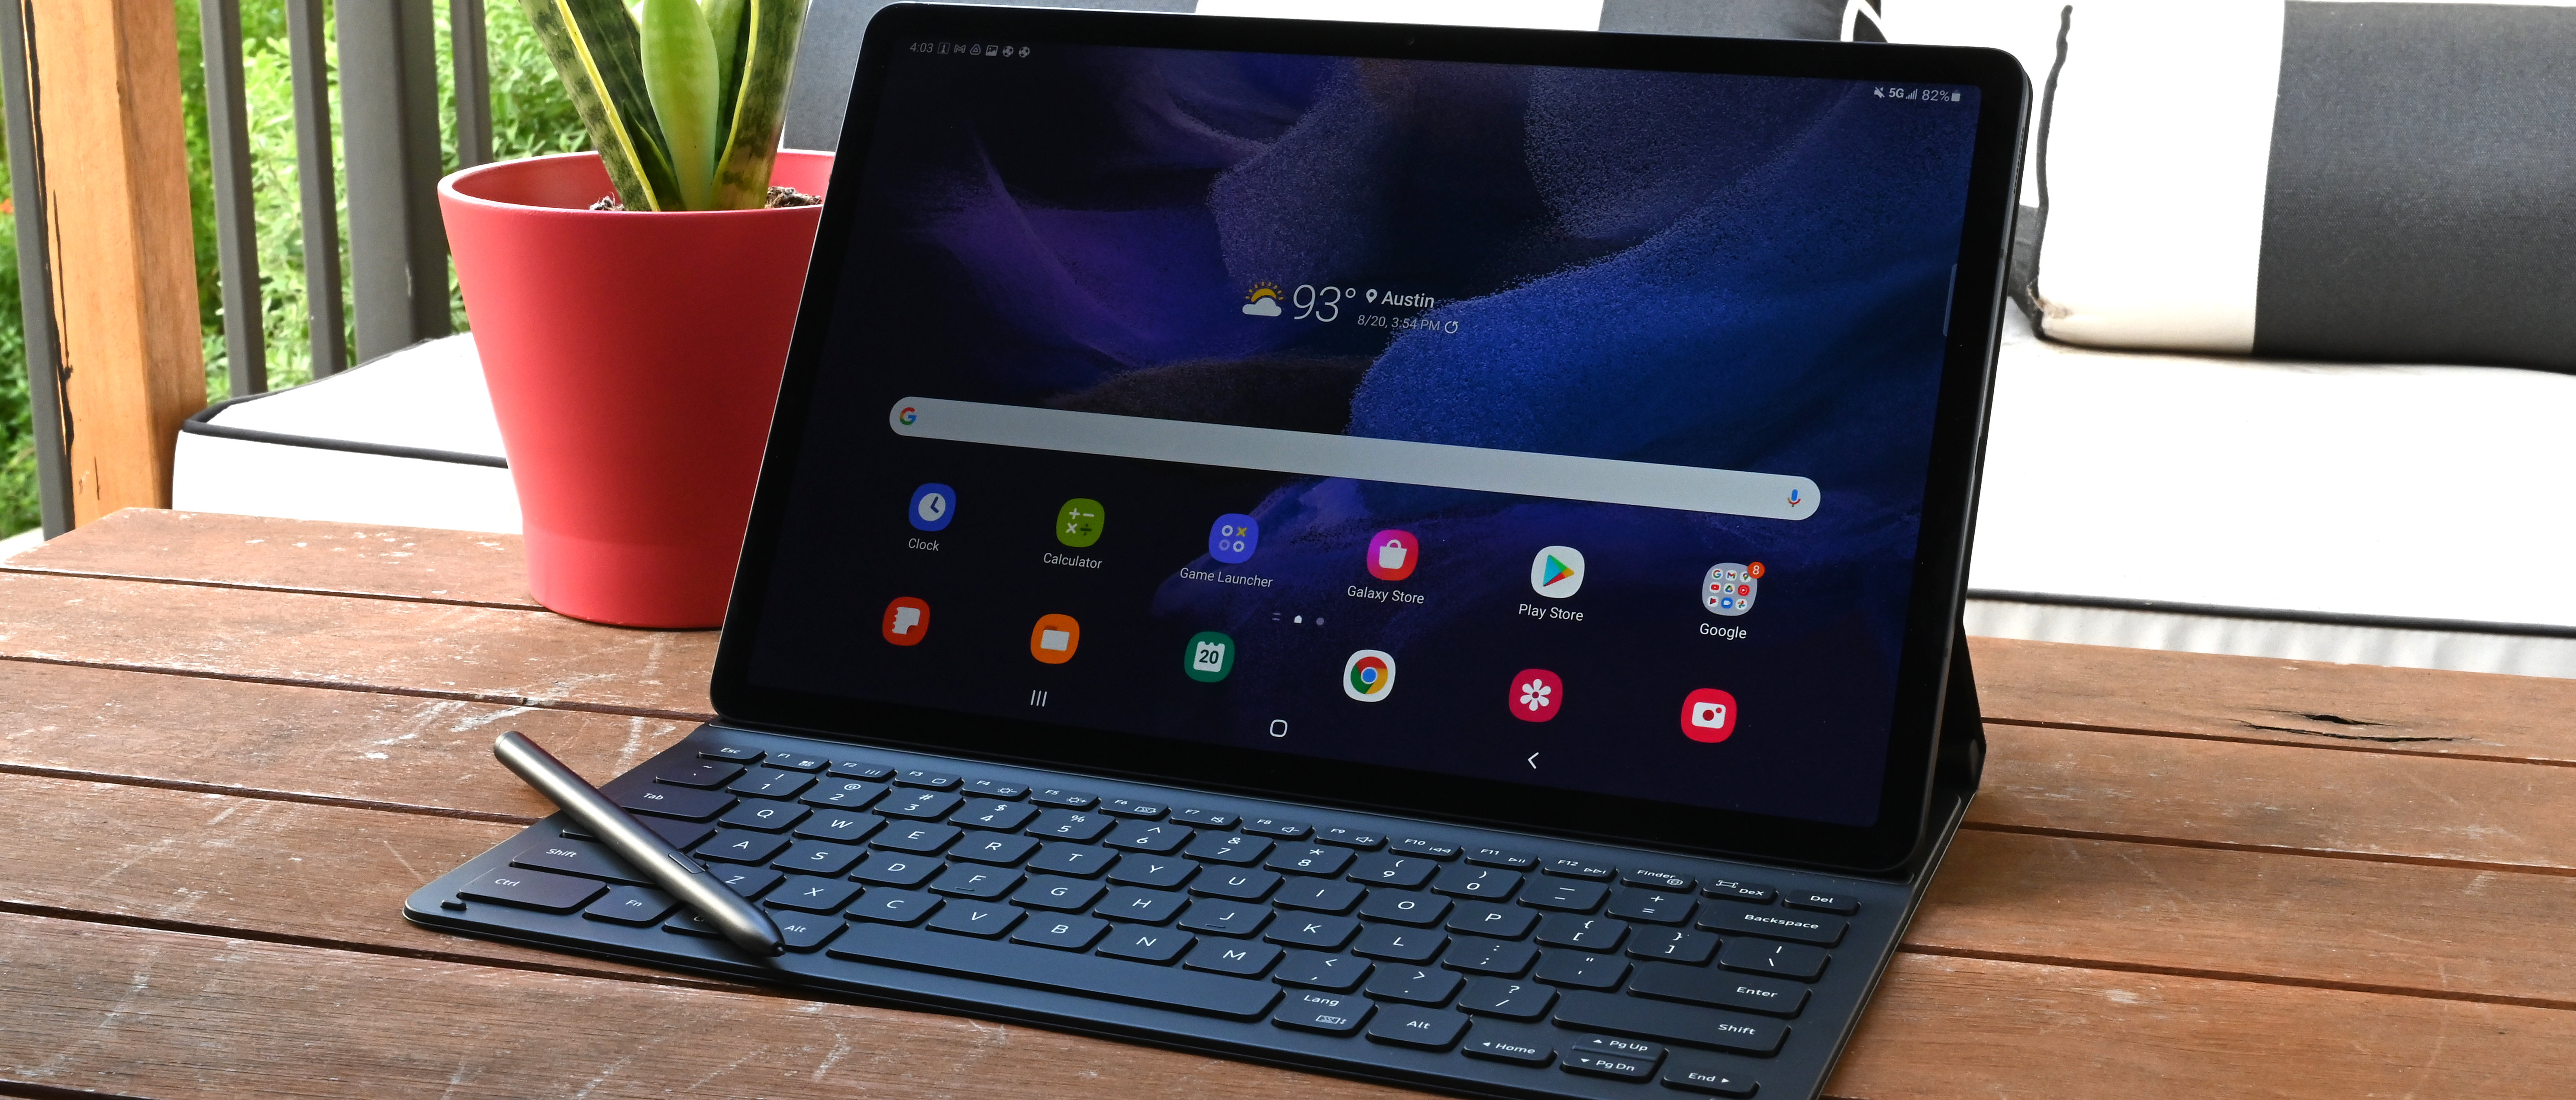 Samsung Galaxy Tab S7 FE review: Fresh Air for Android fans